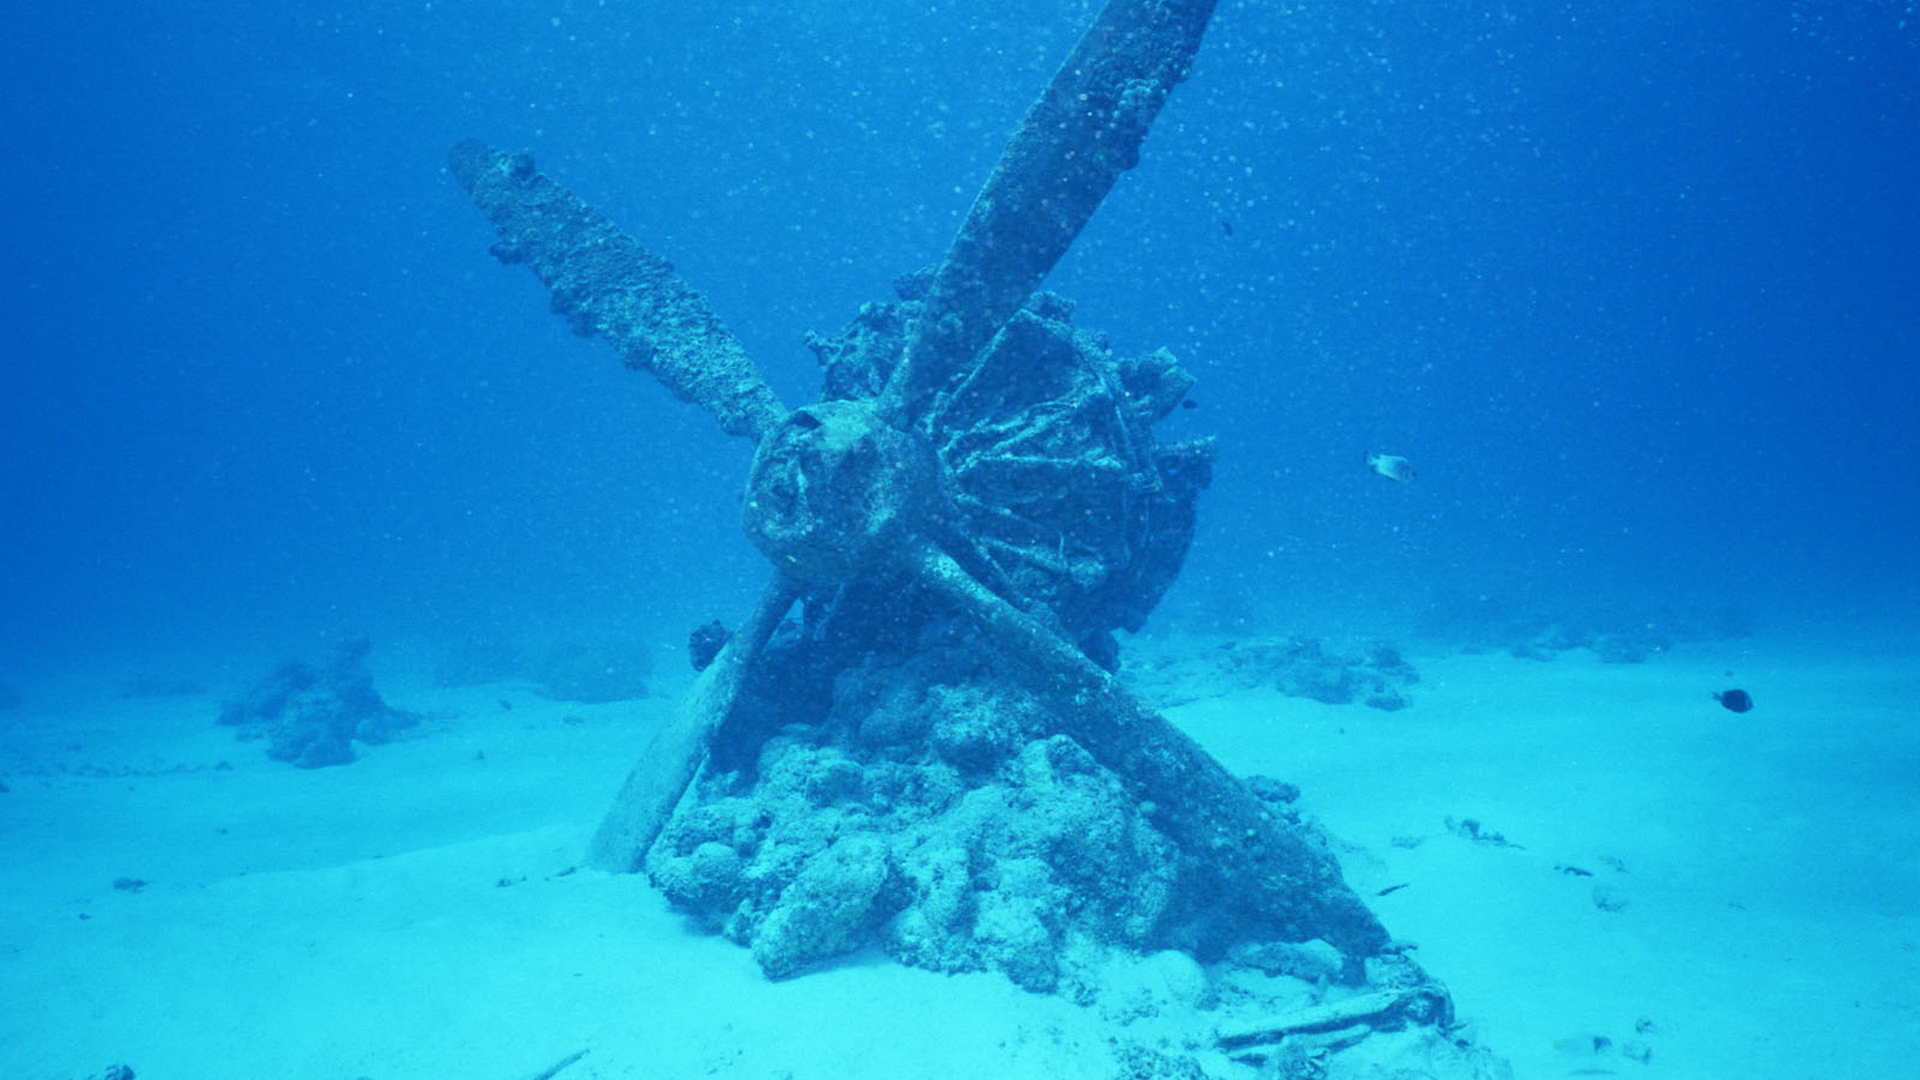 Gallery For Gt Underwater Shipwreck Wallpaper